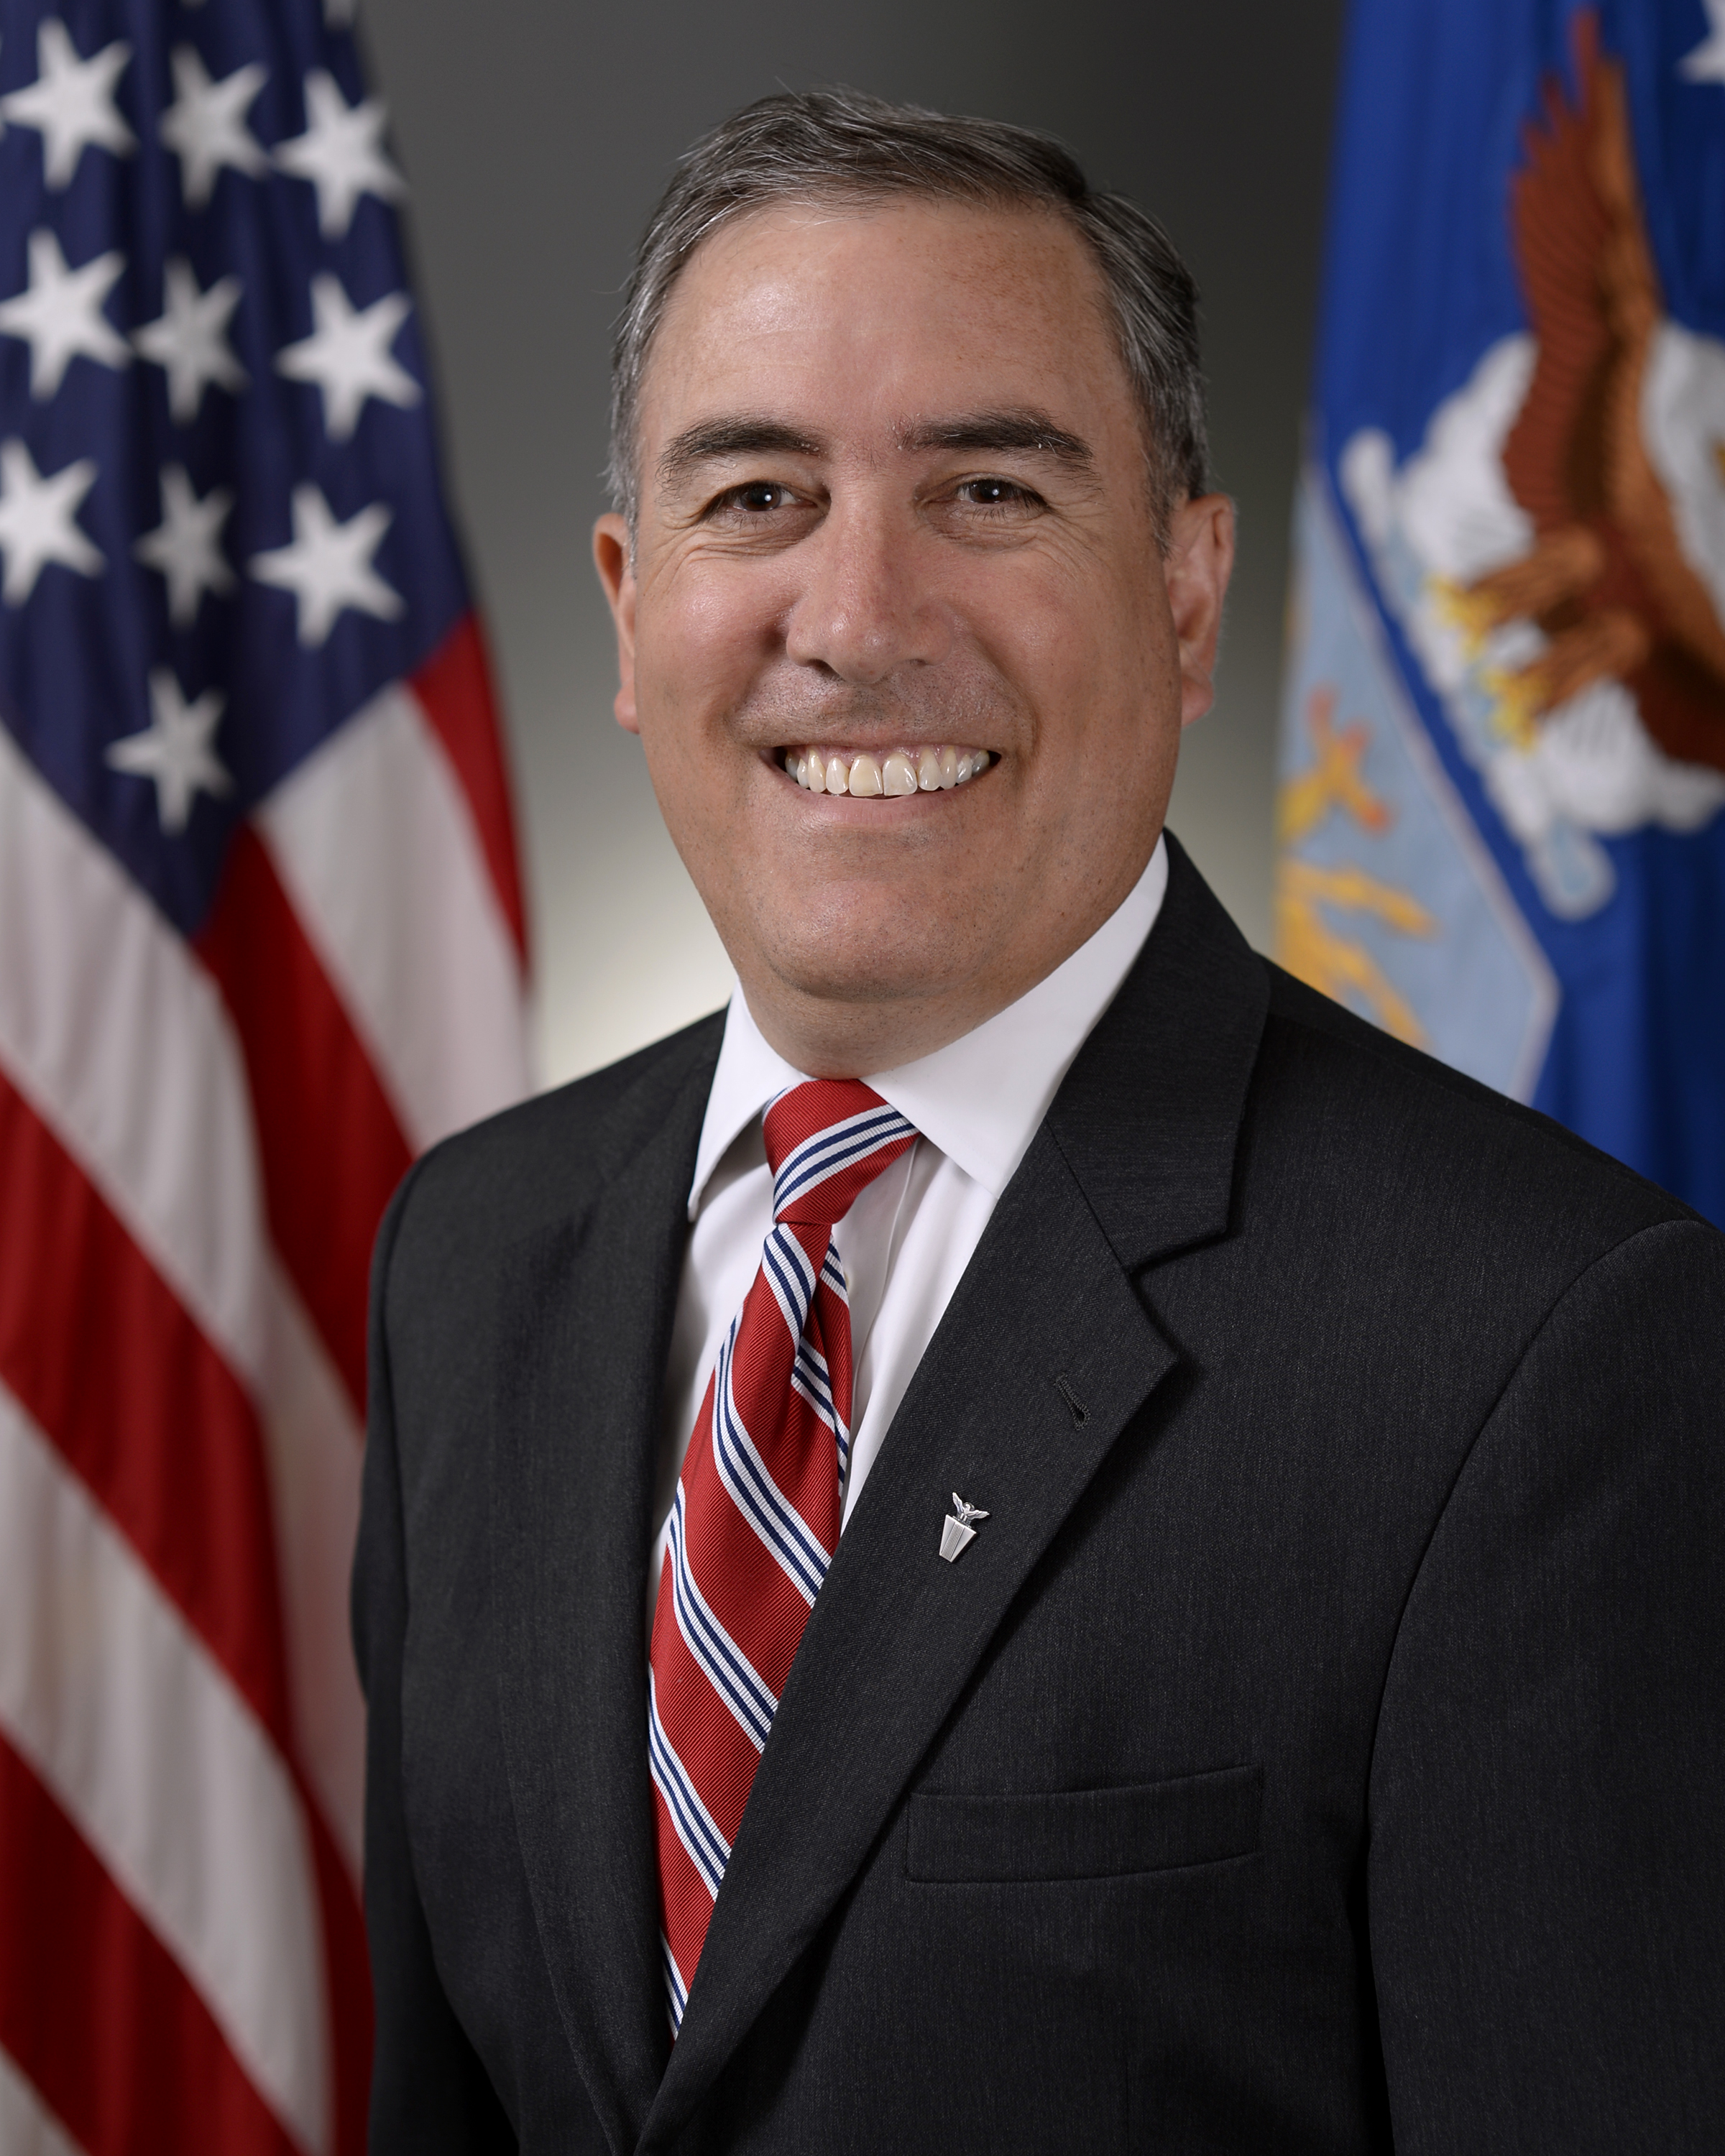 Mr. Roberto I. Guerrero, a member of the Senior Executive Service, is the Deputy Assistant Secretary of the Air Force for Operational Energy, Office of the ... - 140819-F-PB123-100